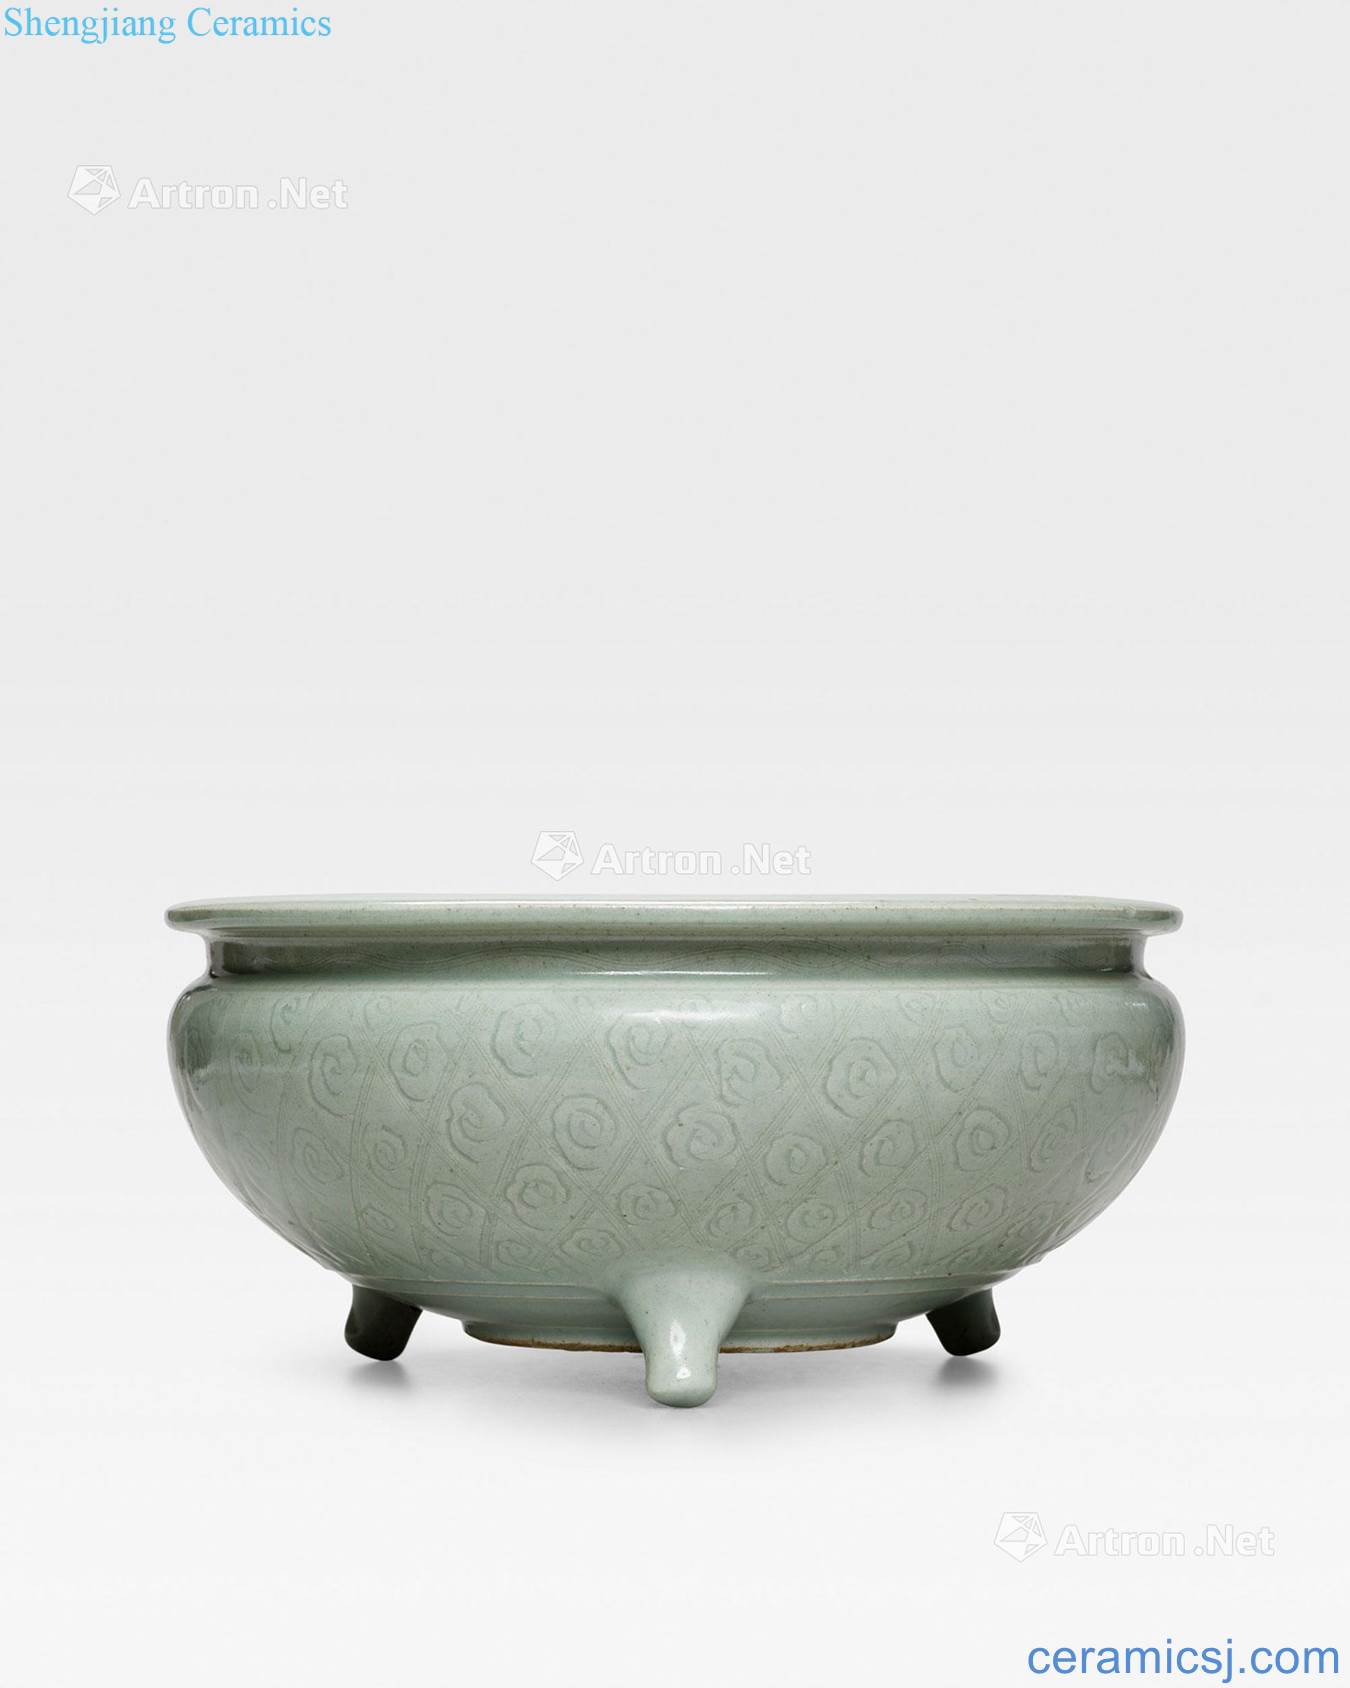 Ming Longquan celadon glaze in traditional furnace with three legs